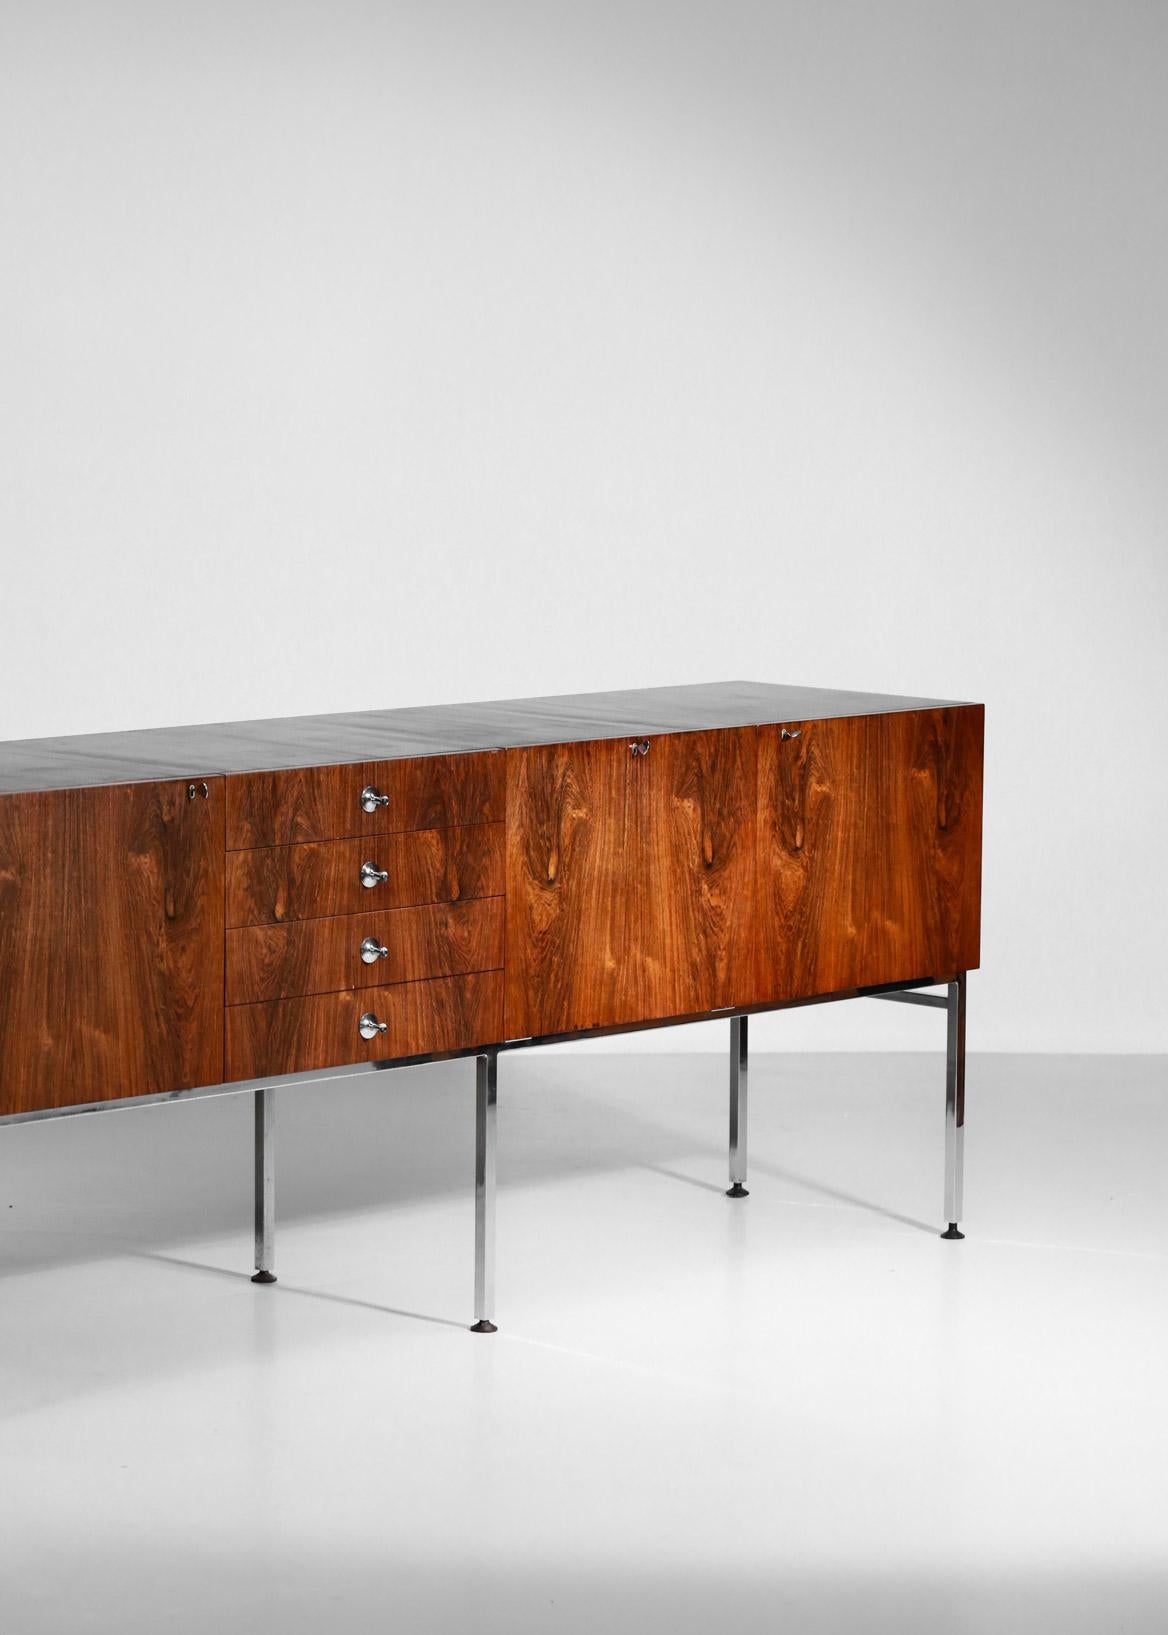 Great Alain Richard Large Sideboard of 1960s for Meuble TV French Design 1960 For Sale 2